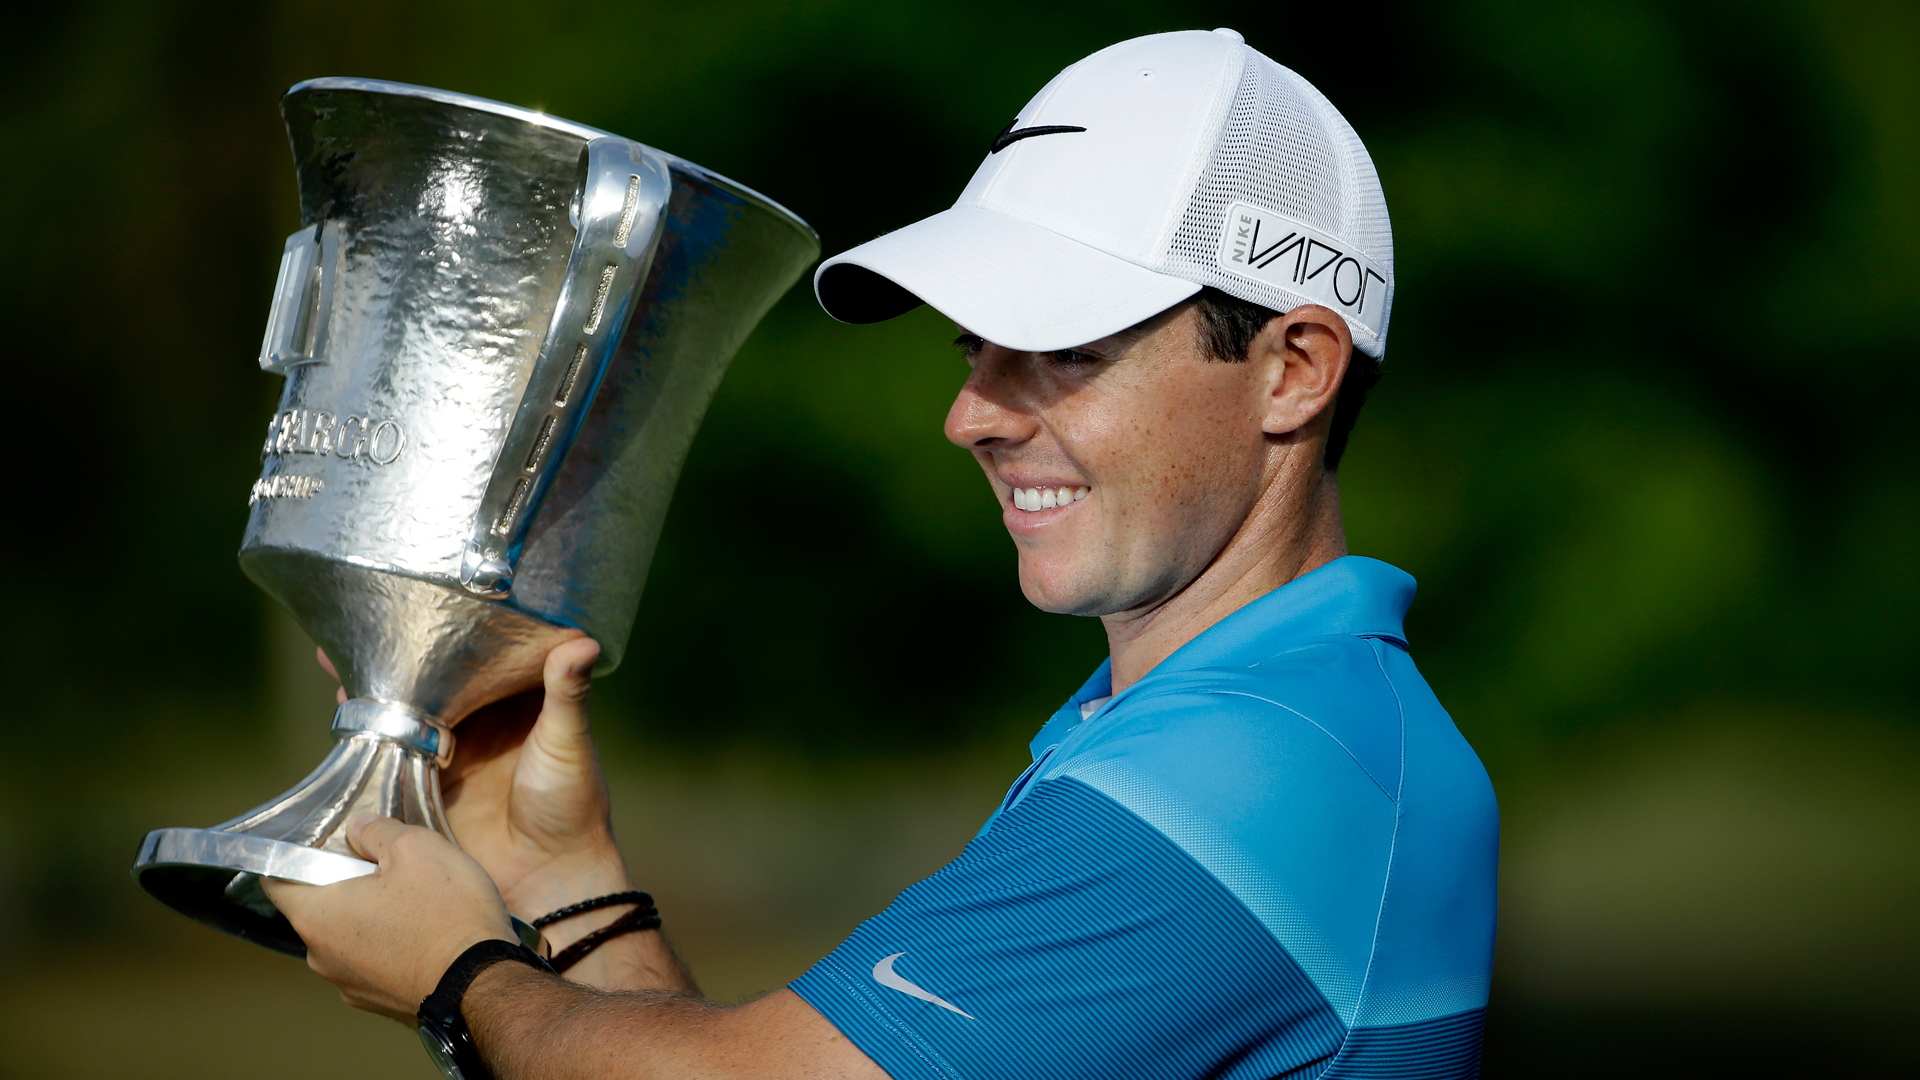 Rory McIlroy's Wells Fargo Championship victory revisited. Golf